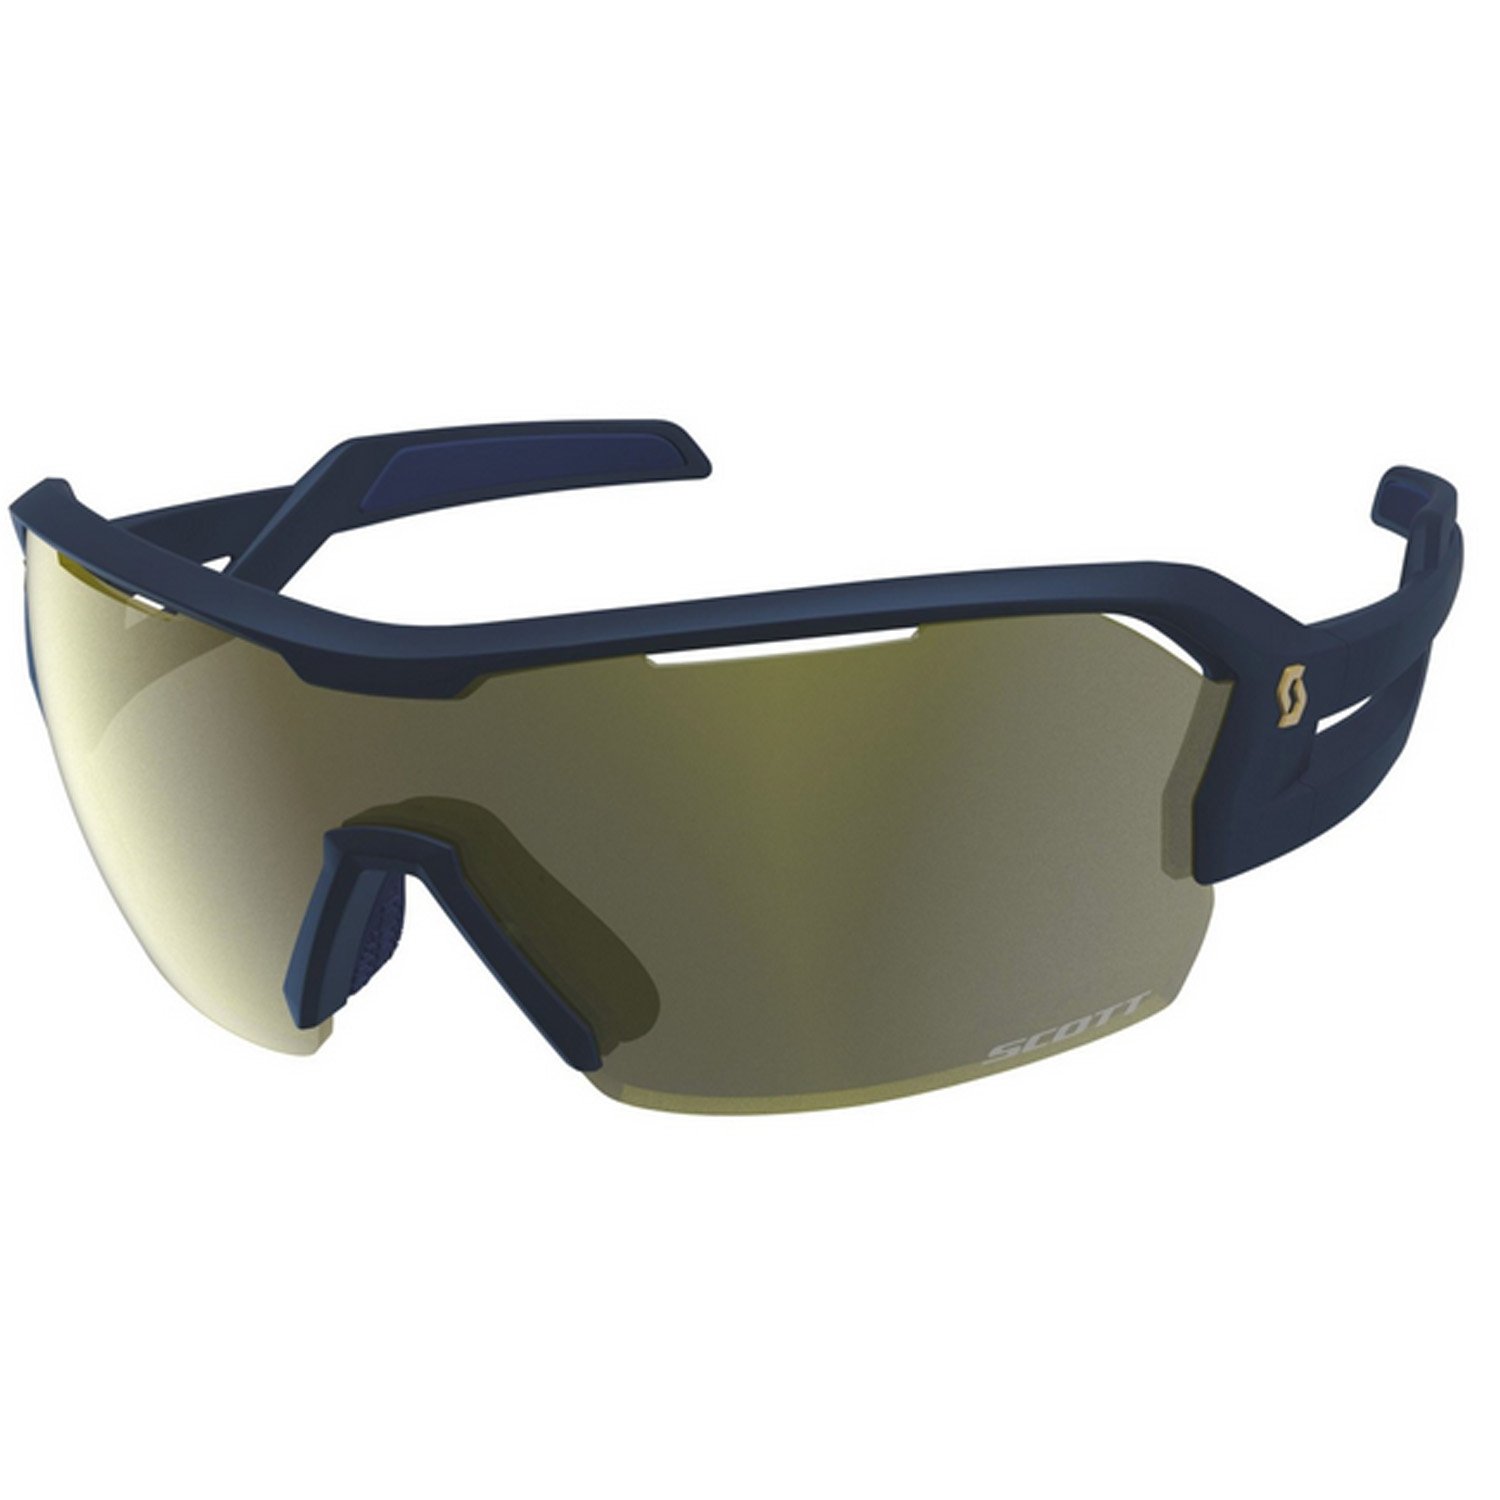 Очки велосипедные SCOTT Spur, submariner blue gold chrome + clear, ES266006-7256291 400nm 480nm blue laser protective goggles for 405nm 450nm 480nm diode eye protection